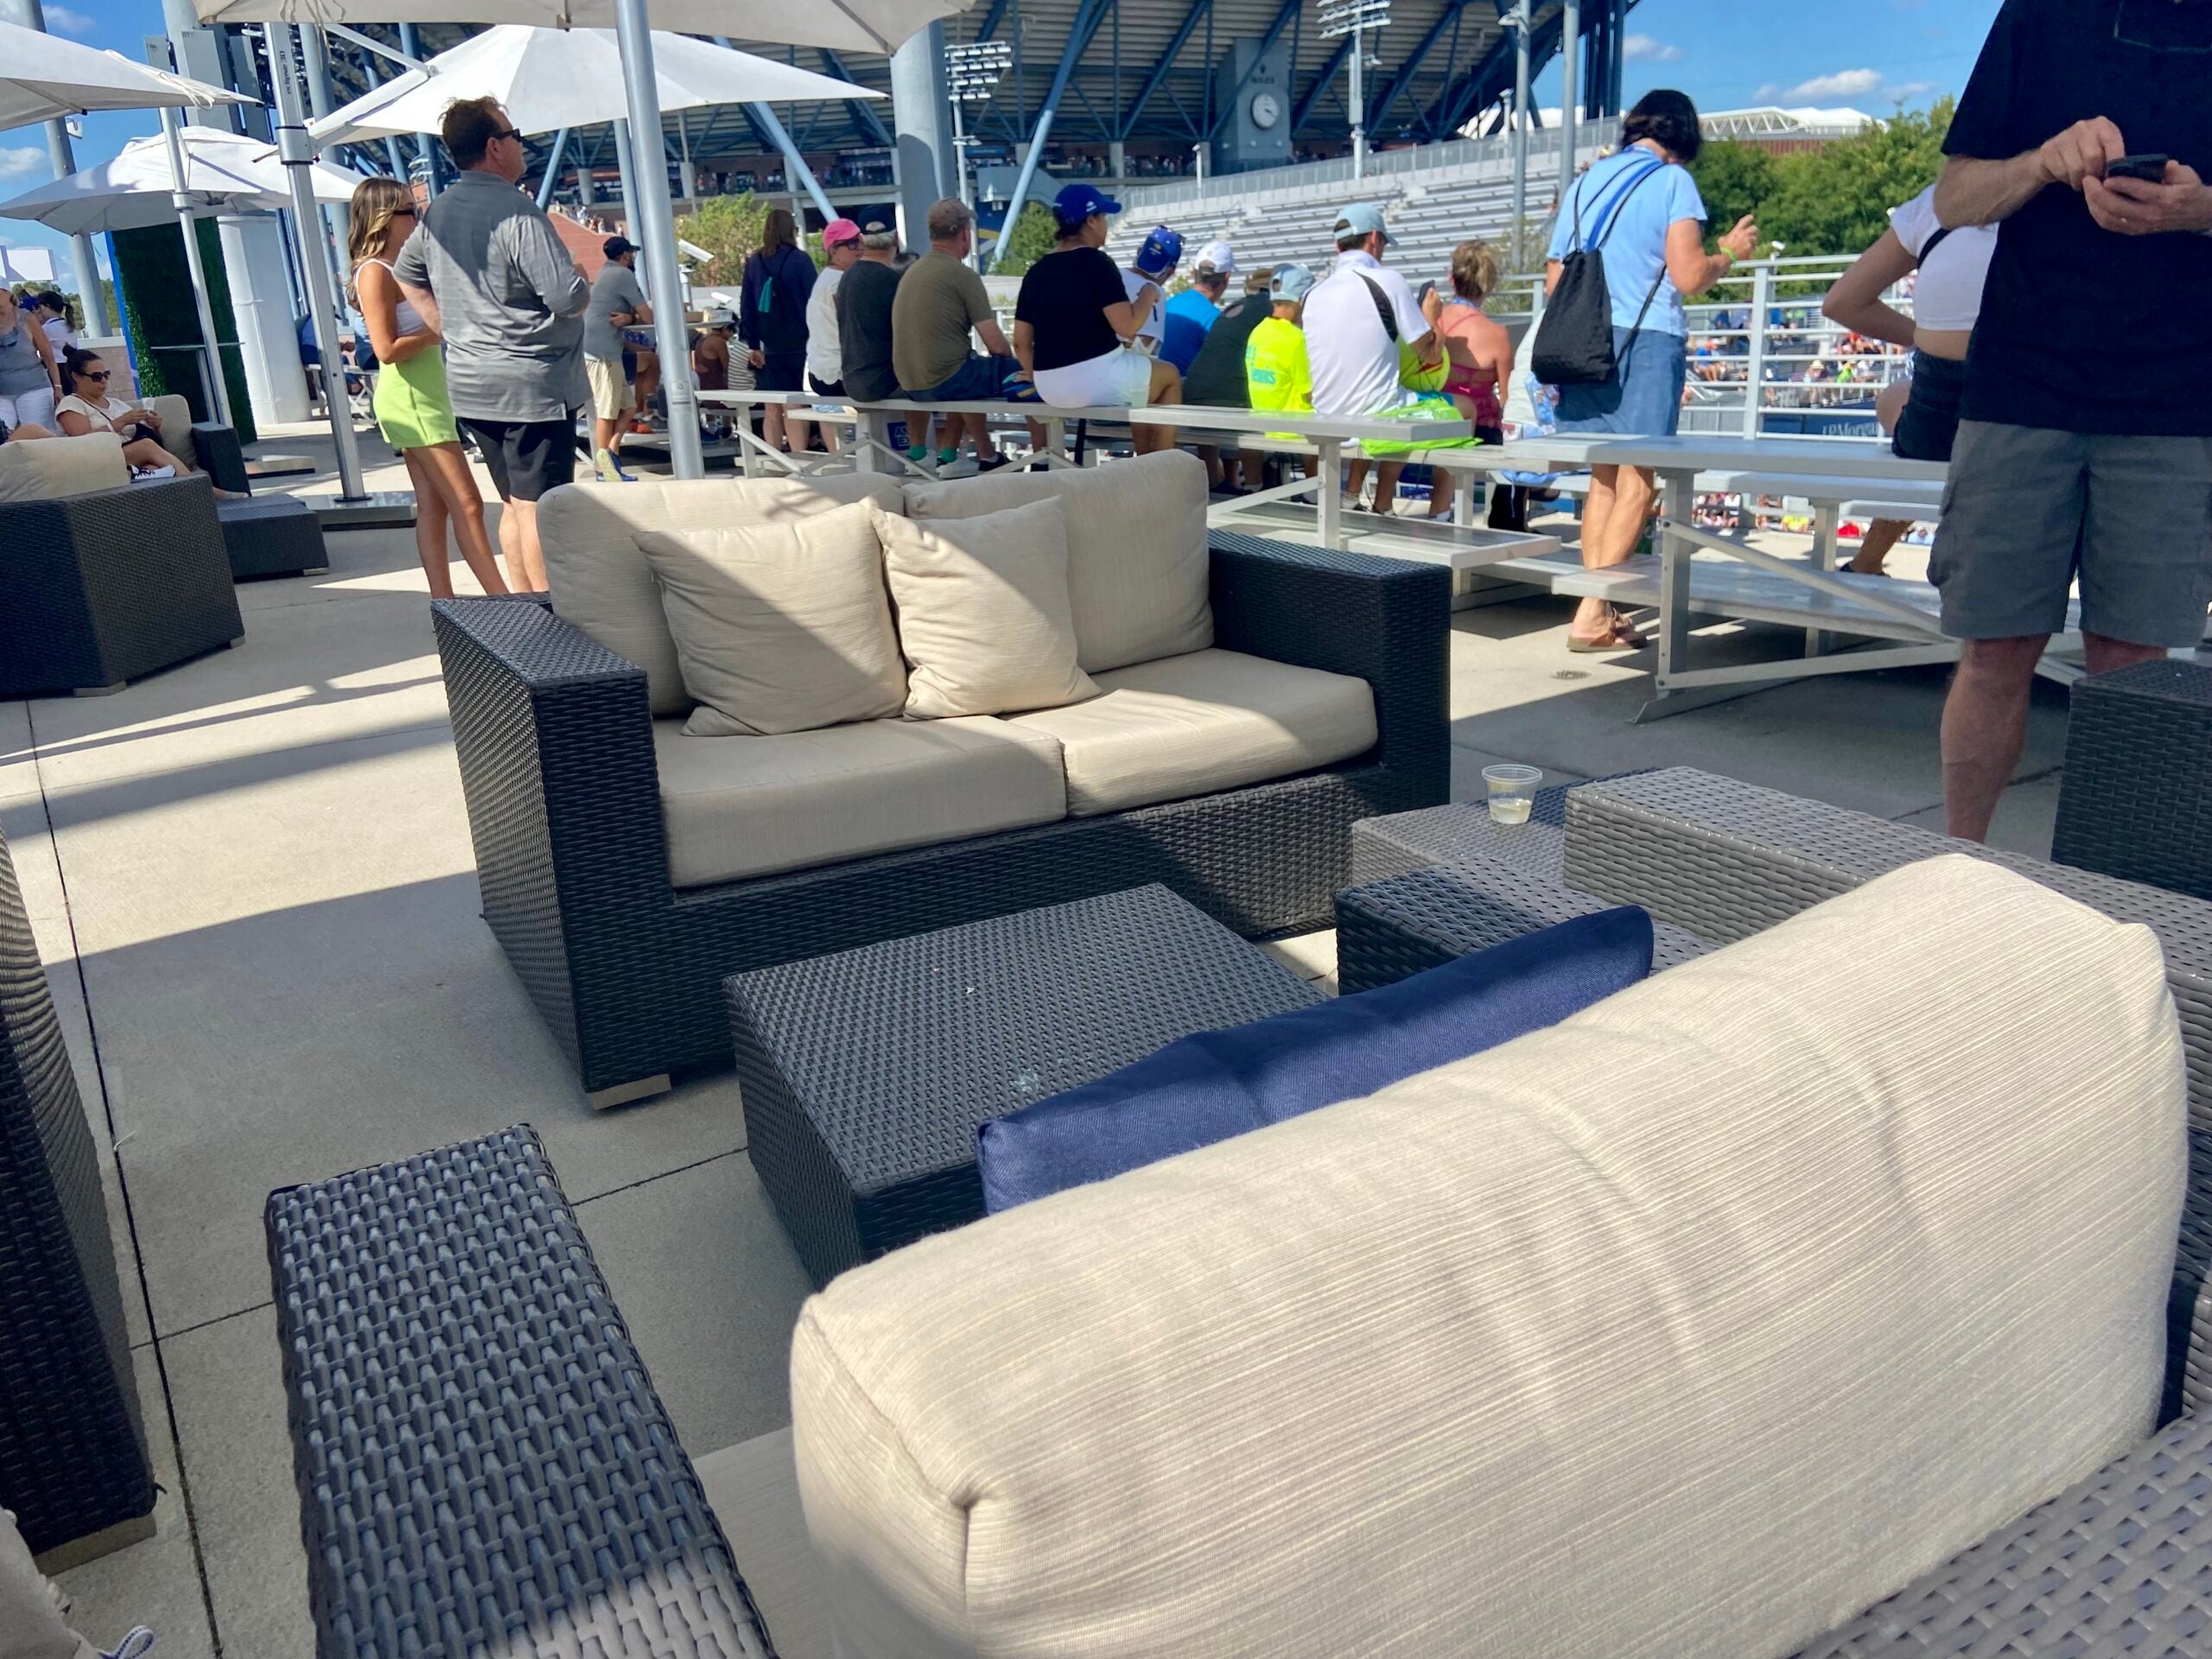 LoveLove A review of the Chase Lounge and Terrace at the US Open